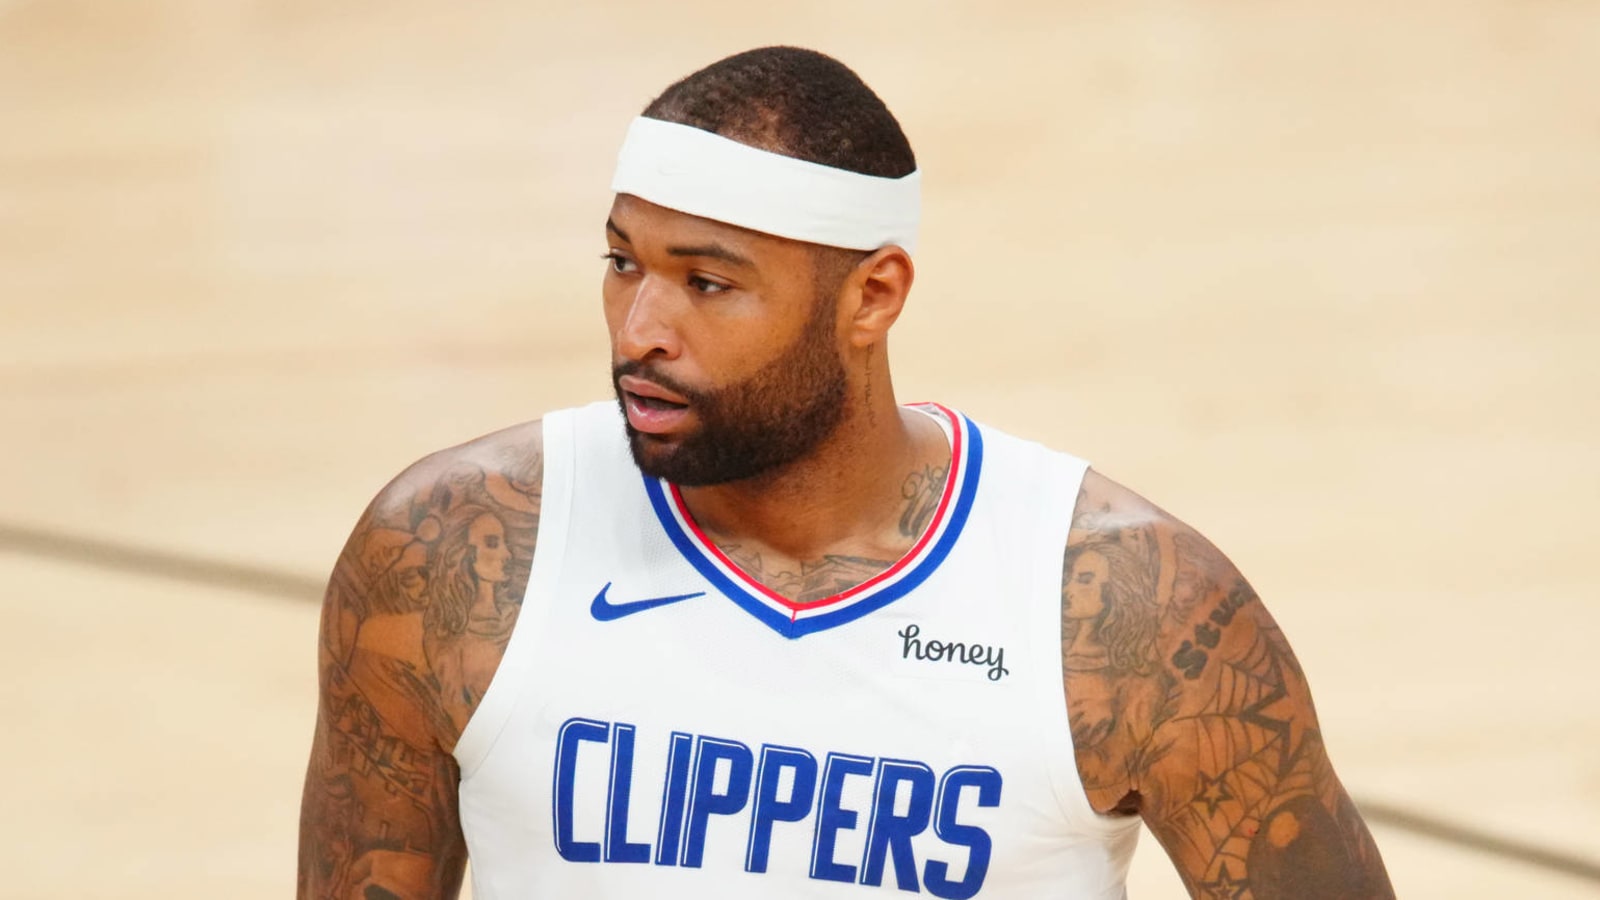 DeMarcus Cousins unexpectedly lands deal with Bucks